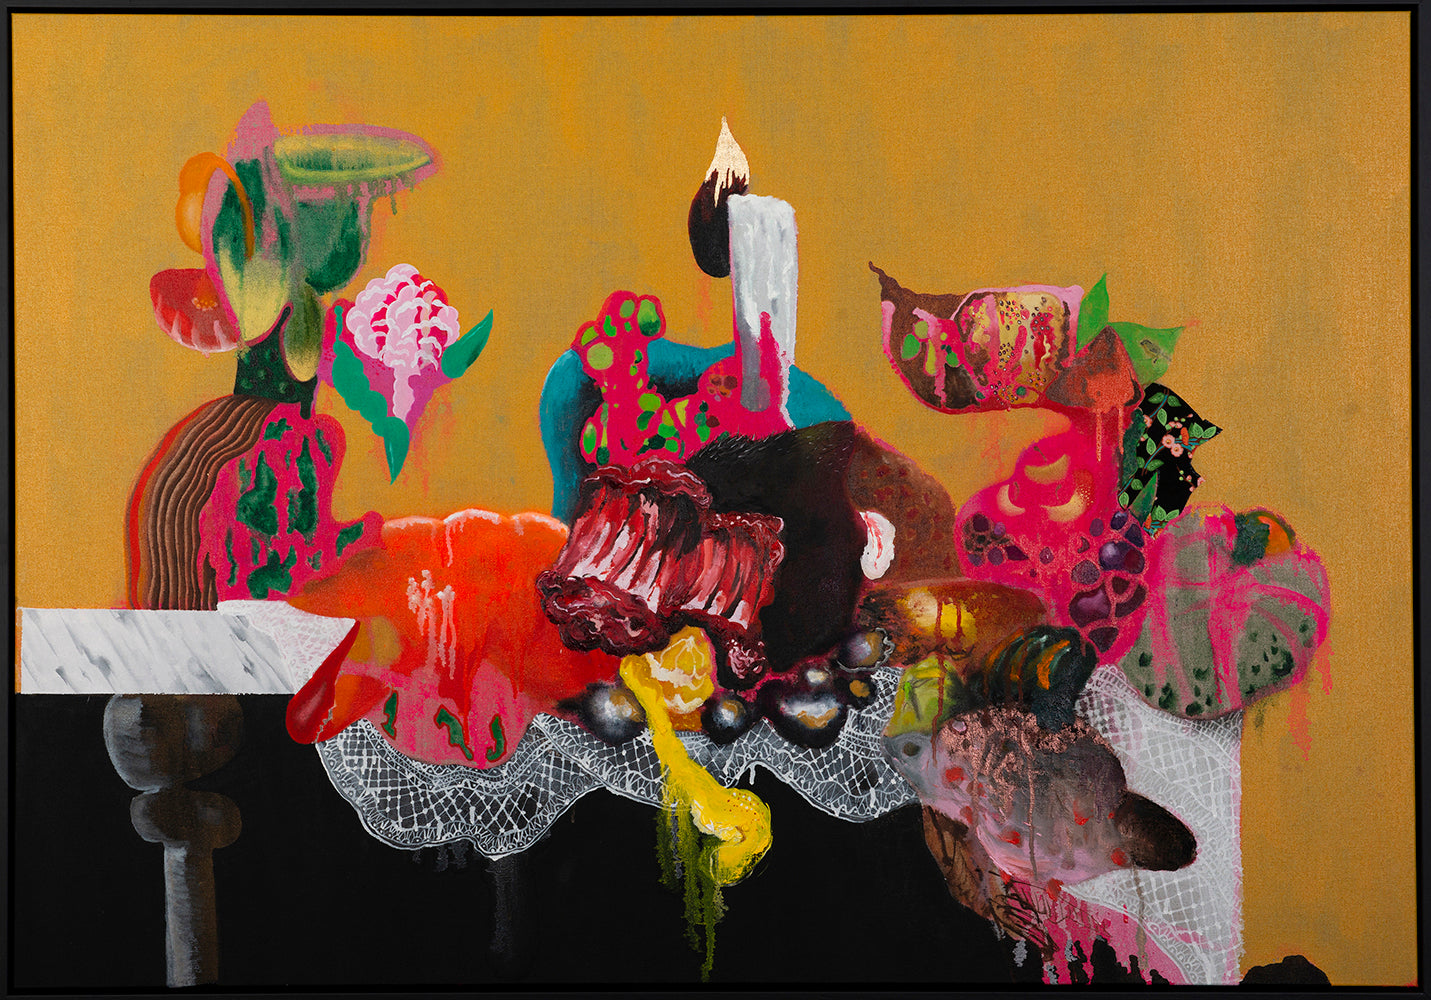 Josh Robbins - Lobster, glass of wine, butterfly, boar's leg, flower, candle, grapes, pomegranate, leaves, pumpkin, squash, berries, fish, oysters, peeled lemon, table leg and table cloth - Luxe Edition